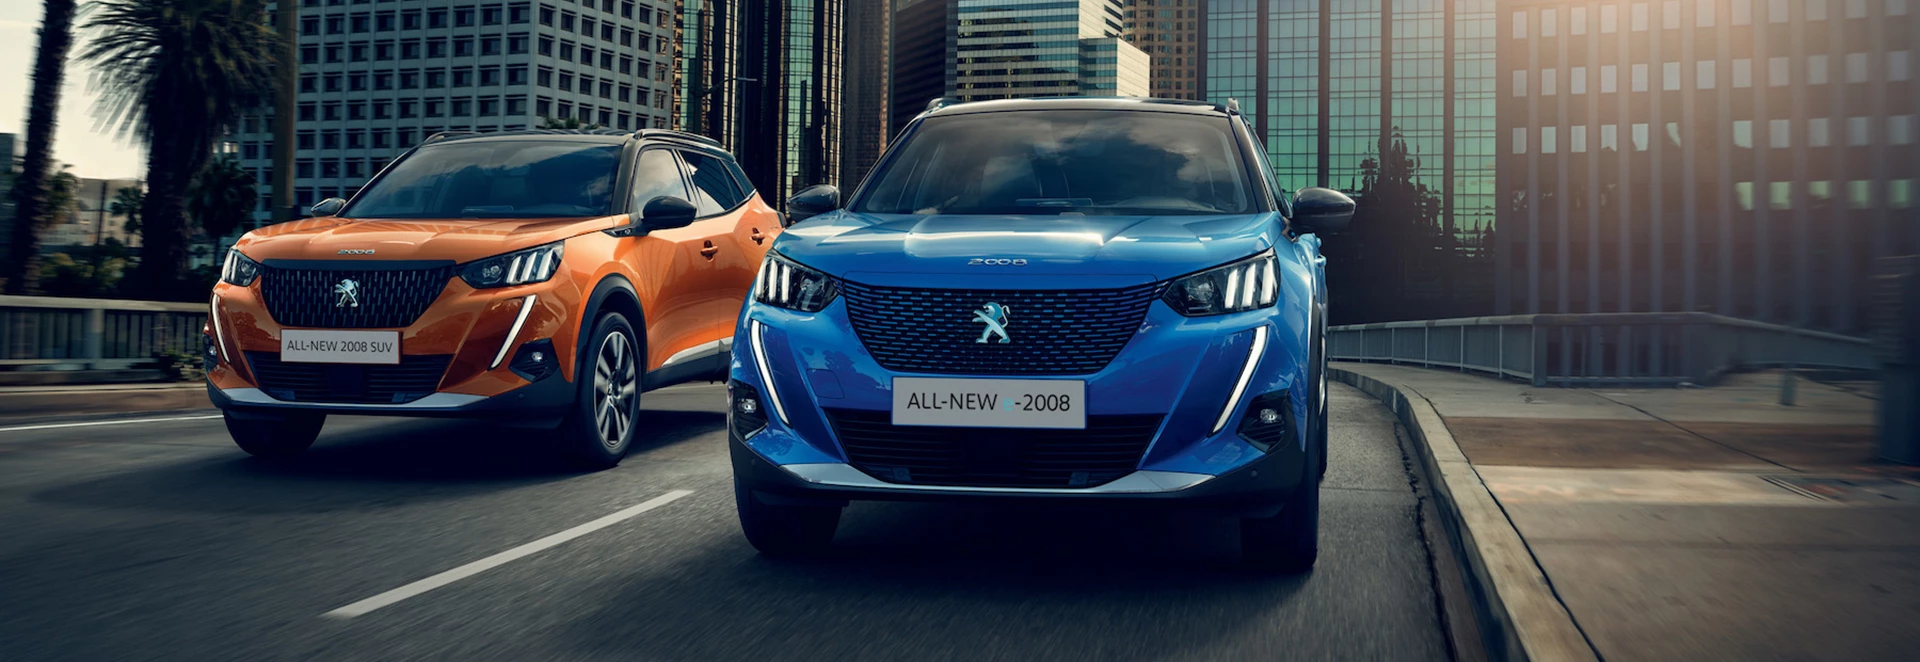 Reservations now open for Peugeot 2008 crossover and electric e-2008